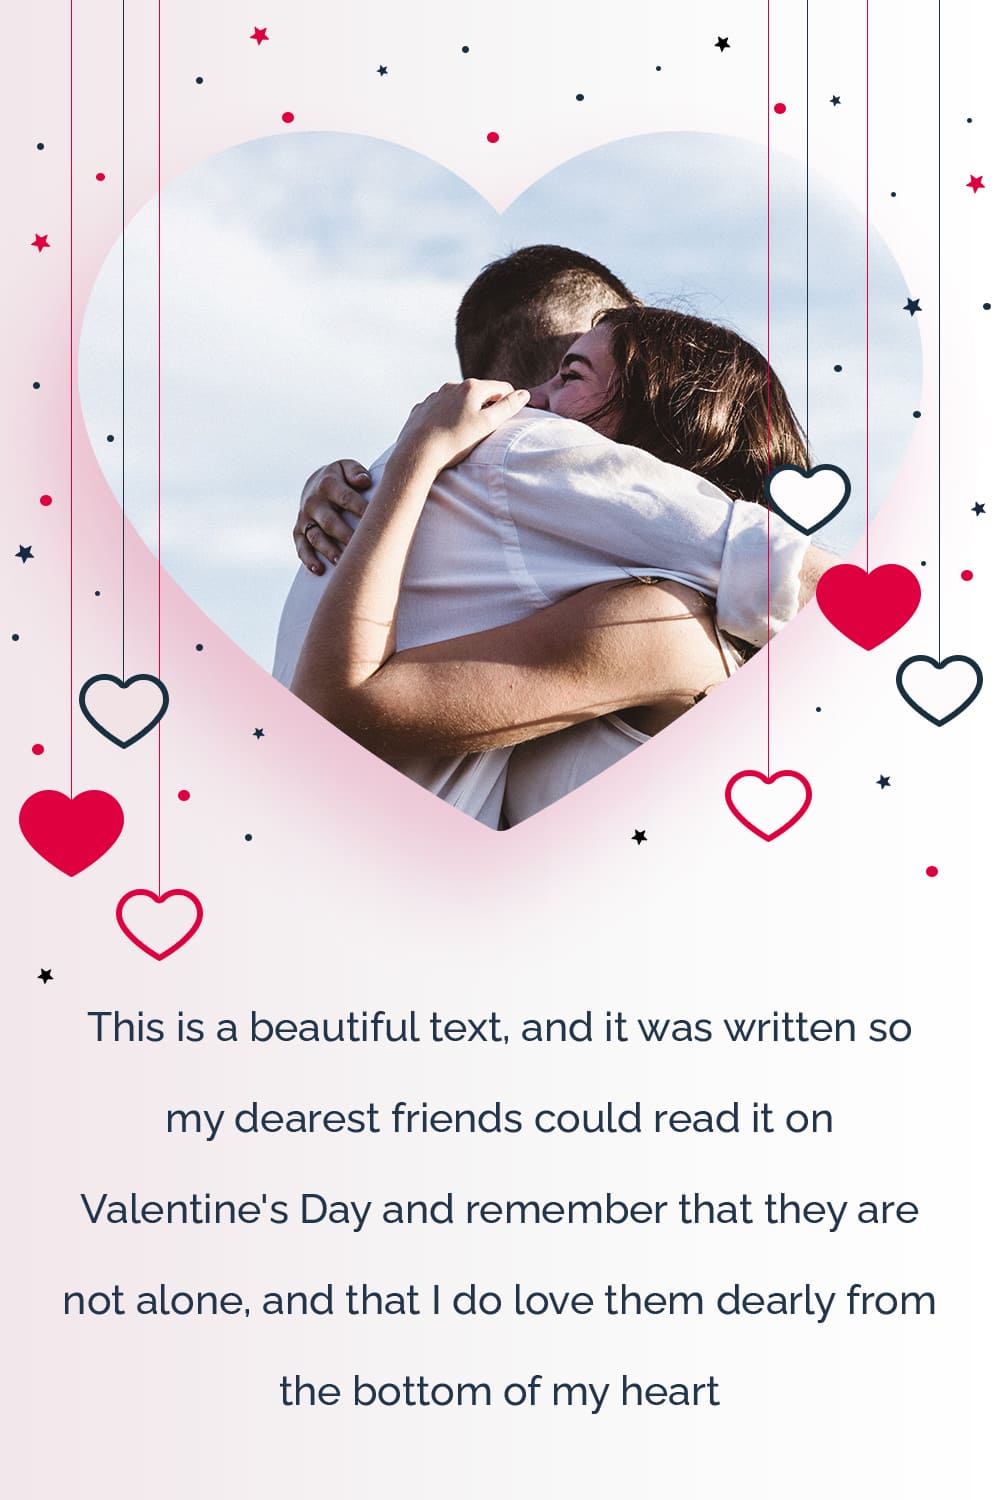 This is a beautiful text, and it was written so my dearest friends could read it on Valentine's Day and remember that they are not alone and that I do love them dearly from the bottom of my heart.